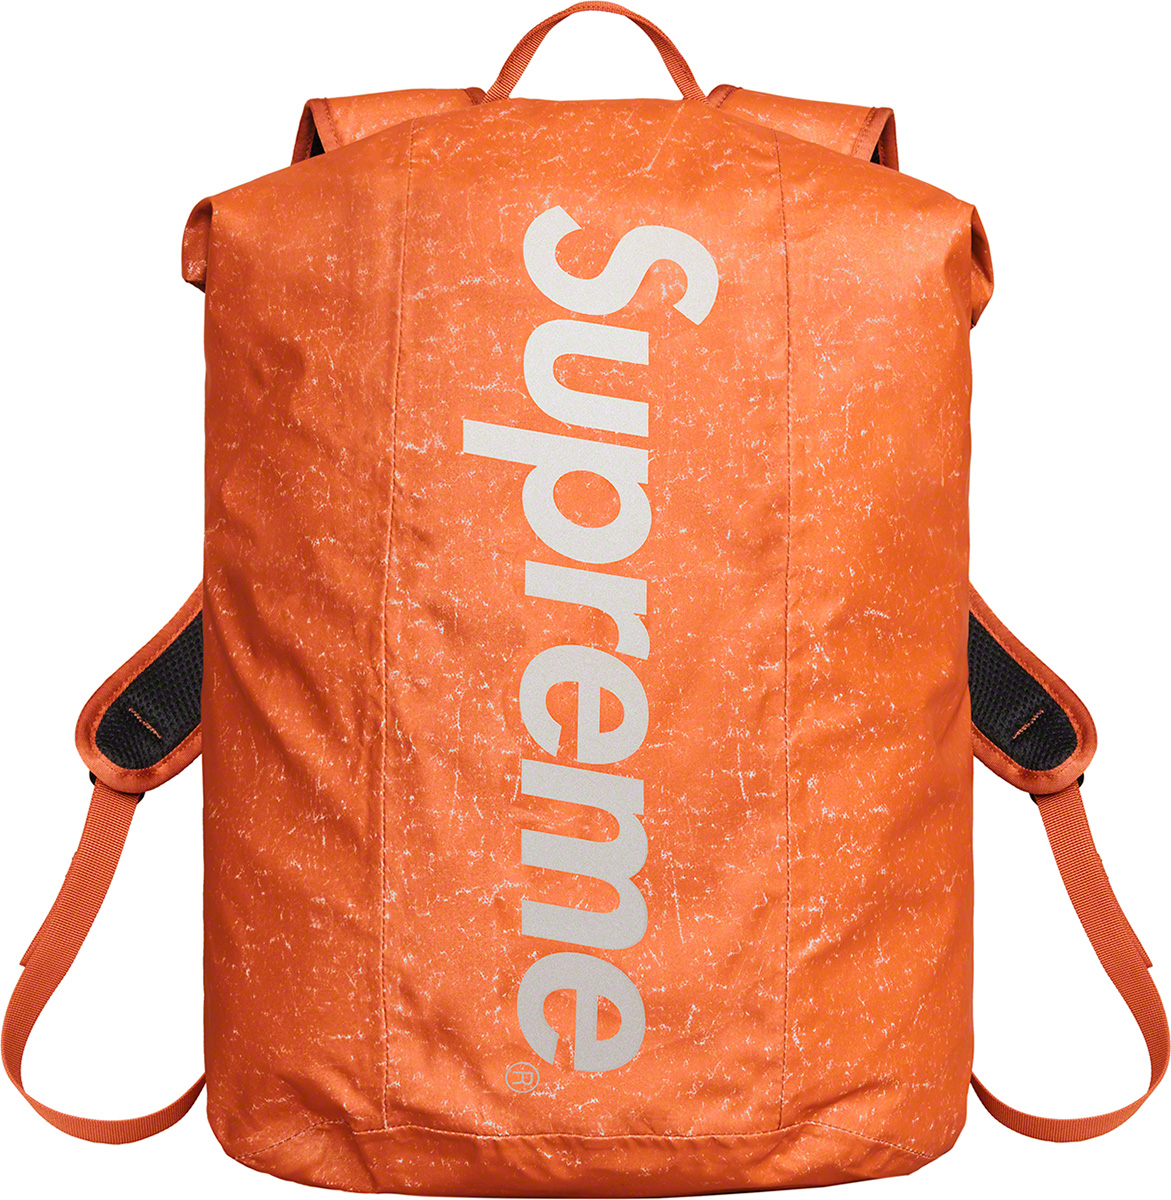 Waterproof Reflective Speckled Backpack - fall winter 2020 - Supreme